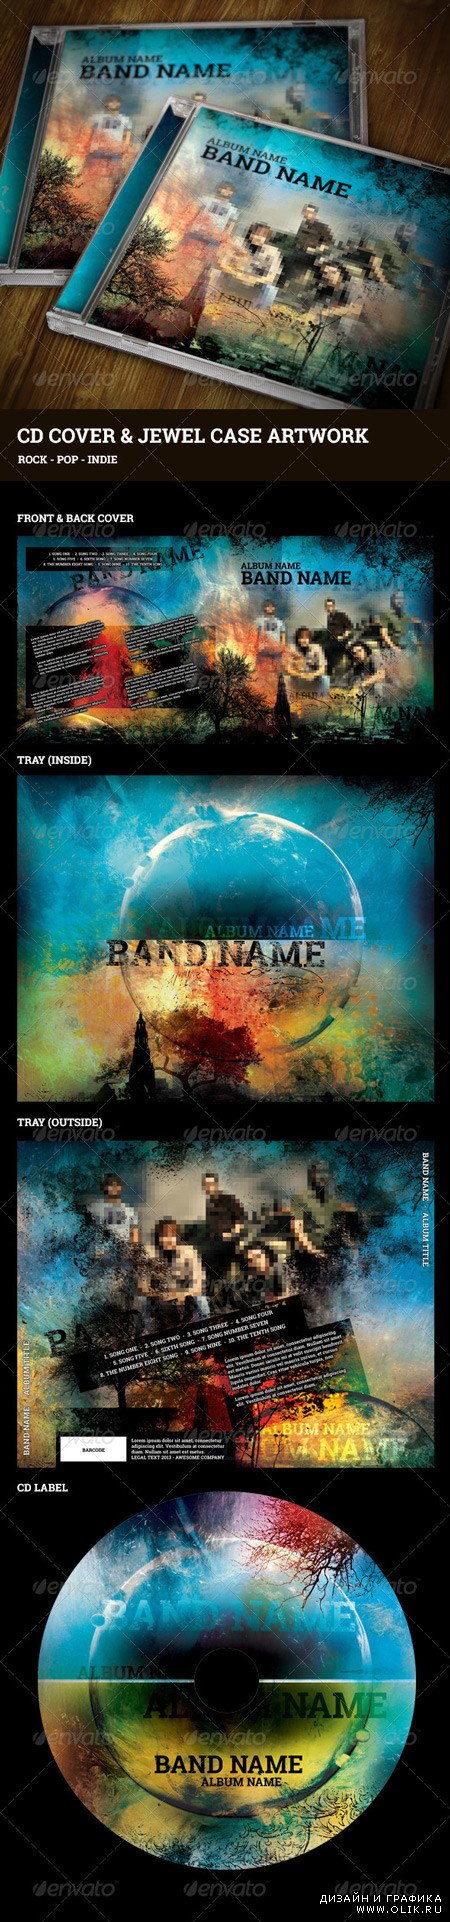 CD Cover and Jewel Case Artwork